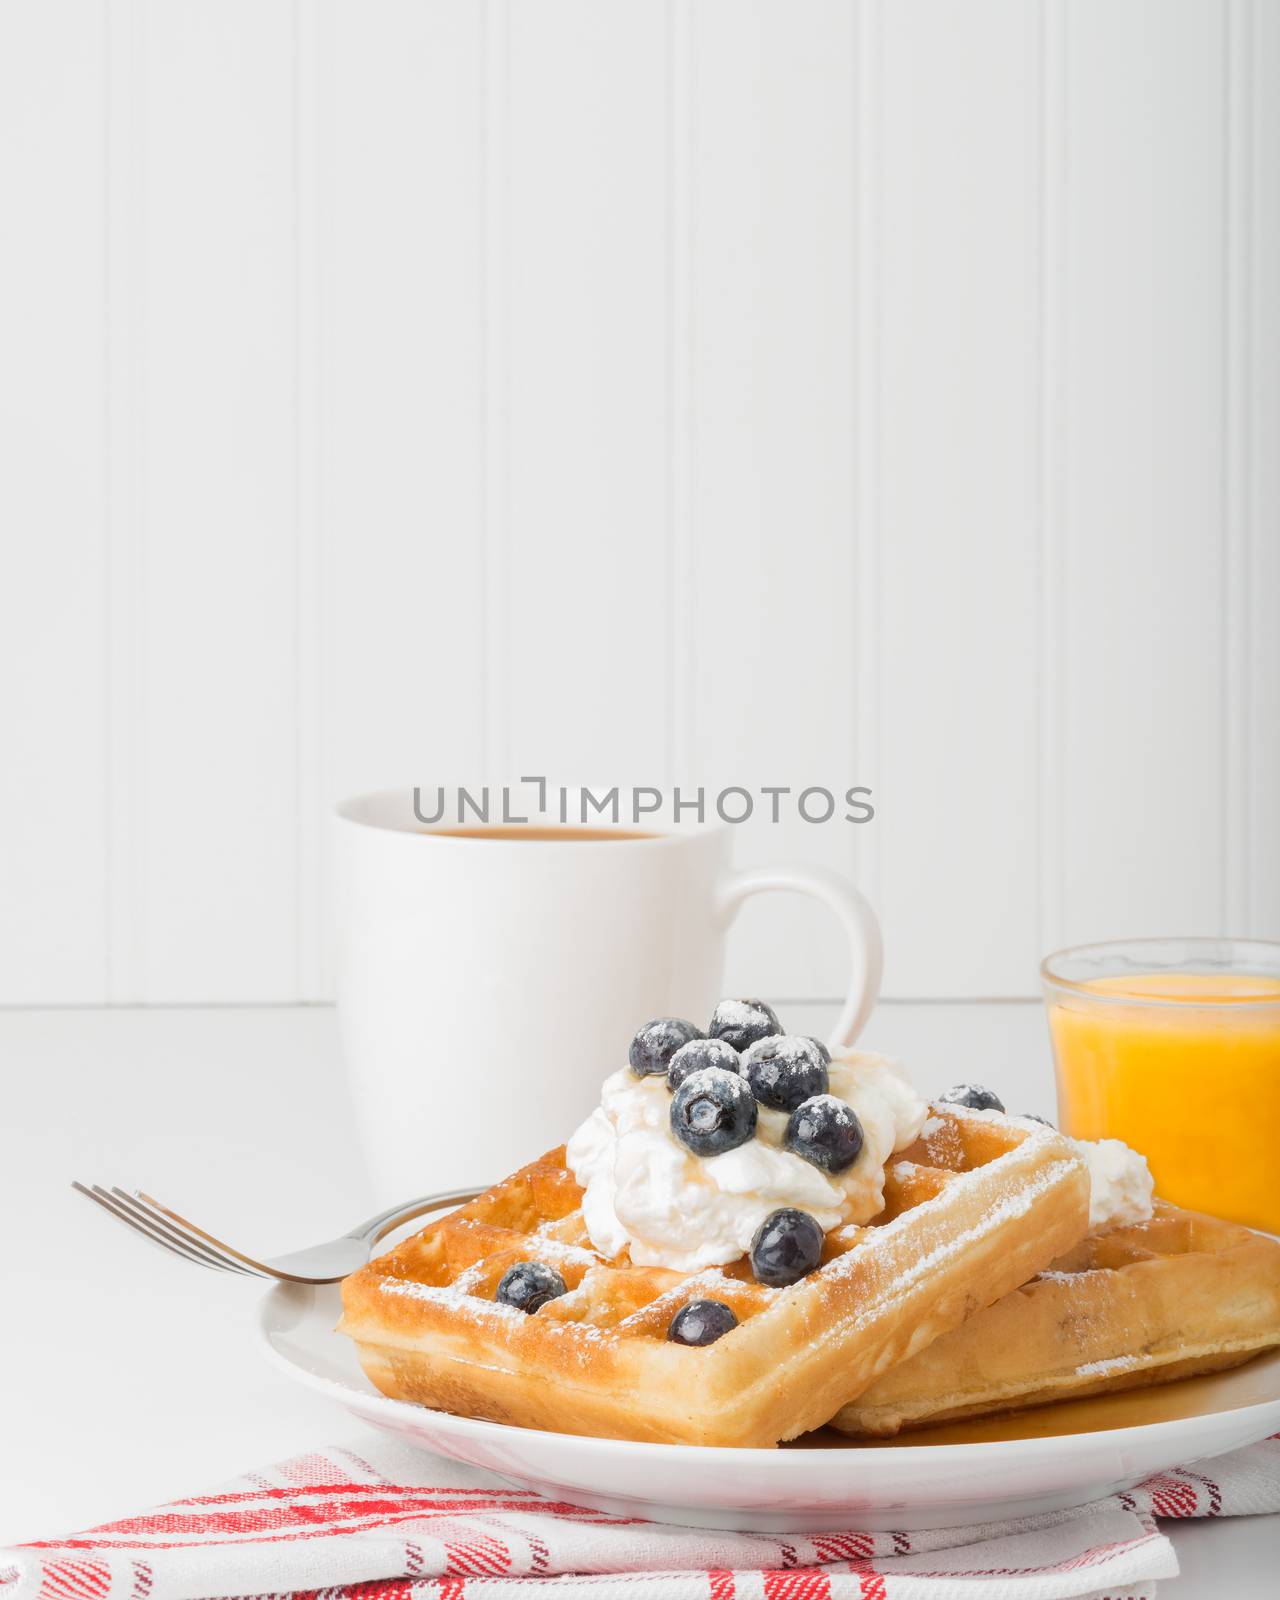 Plate of waffles and blueberries with whipped cream.